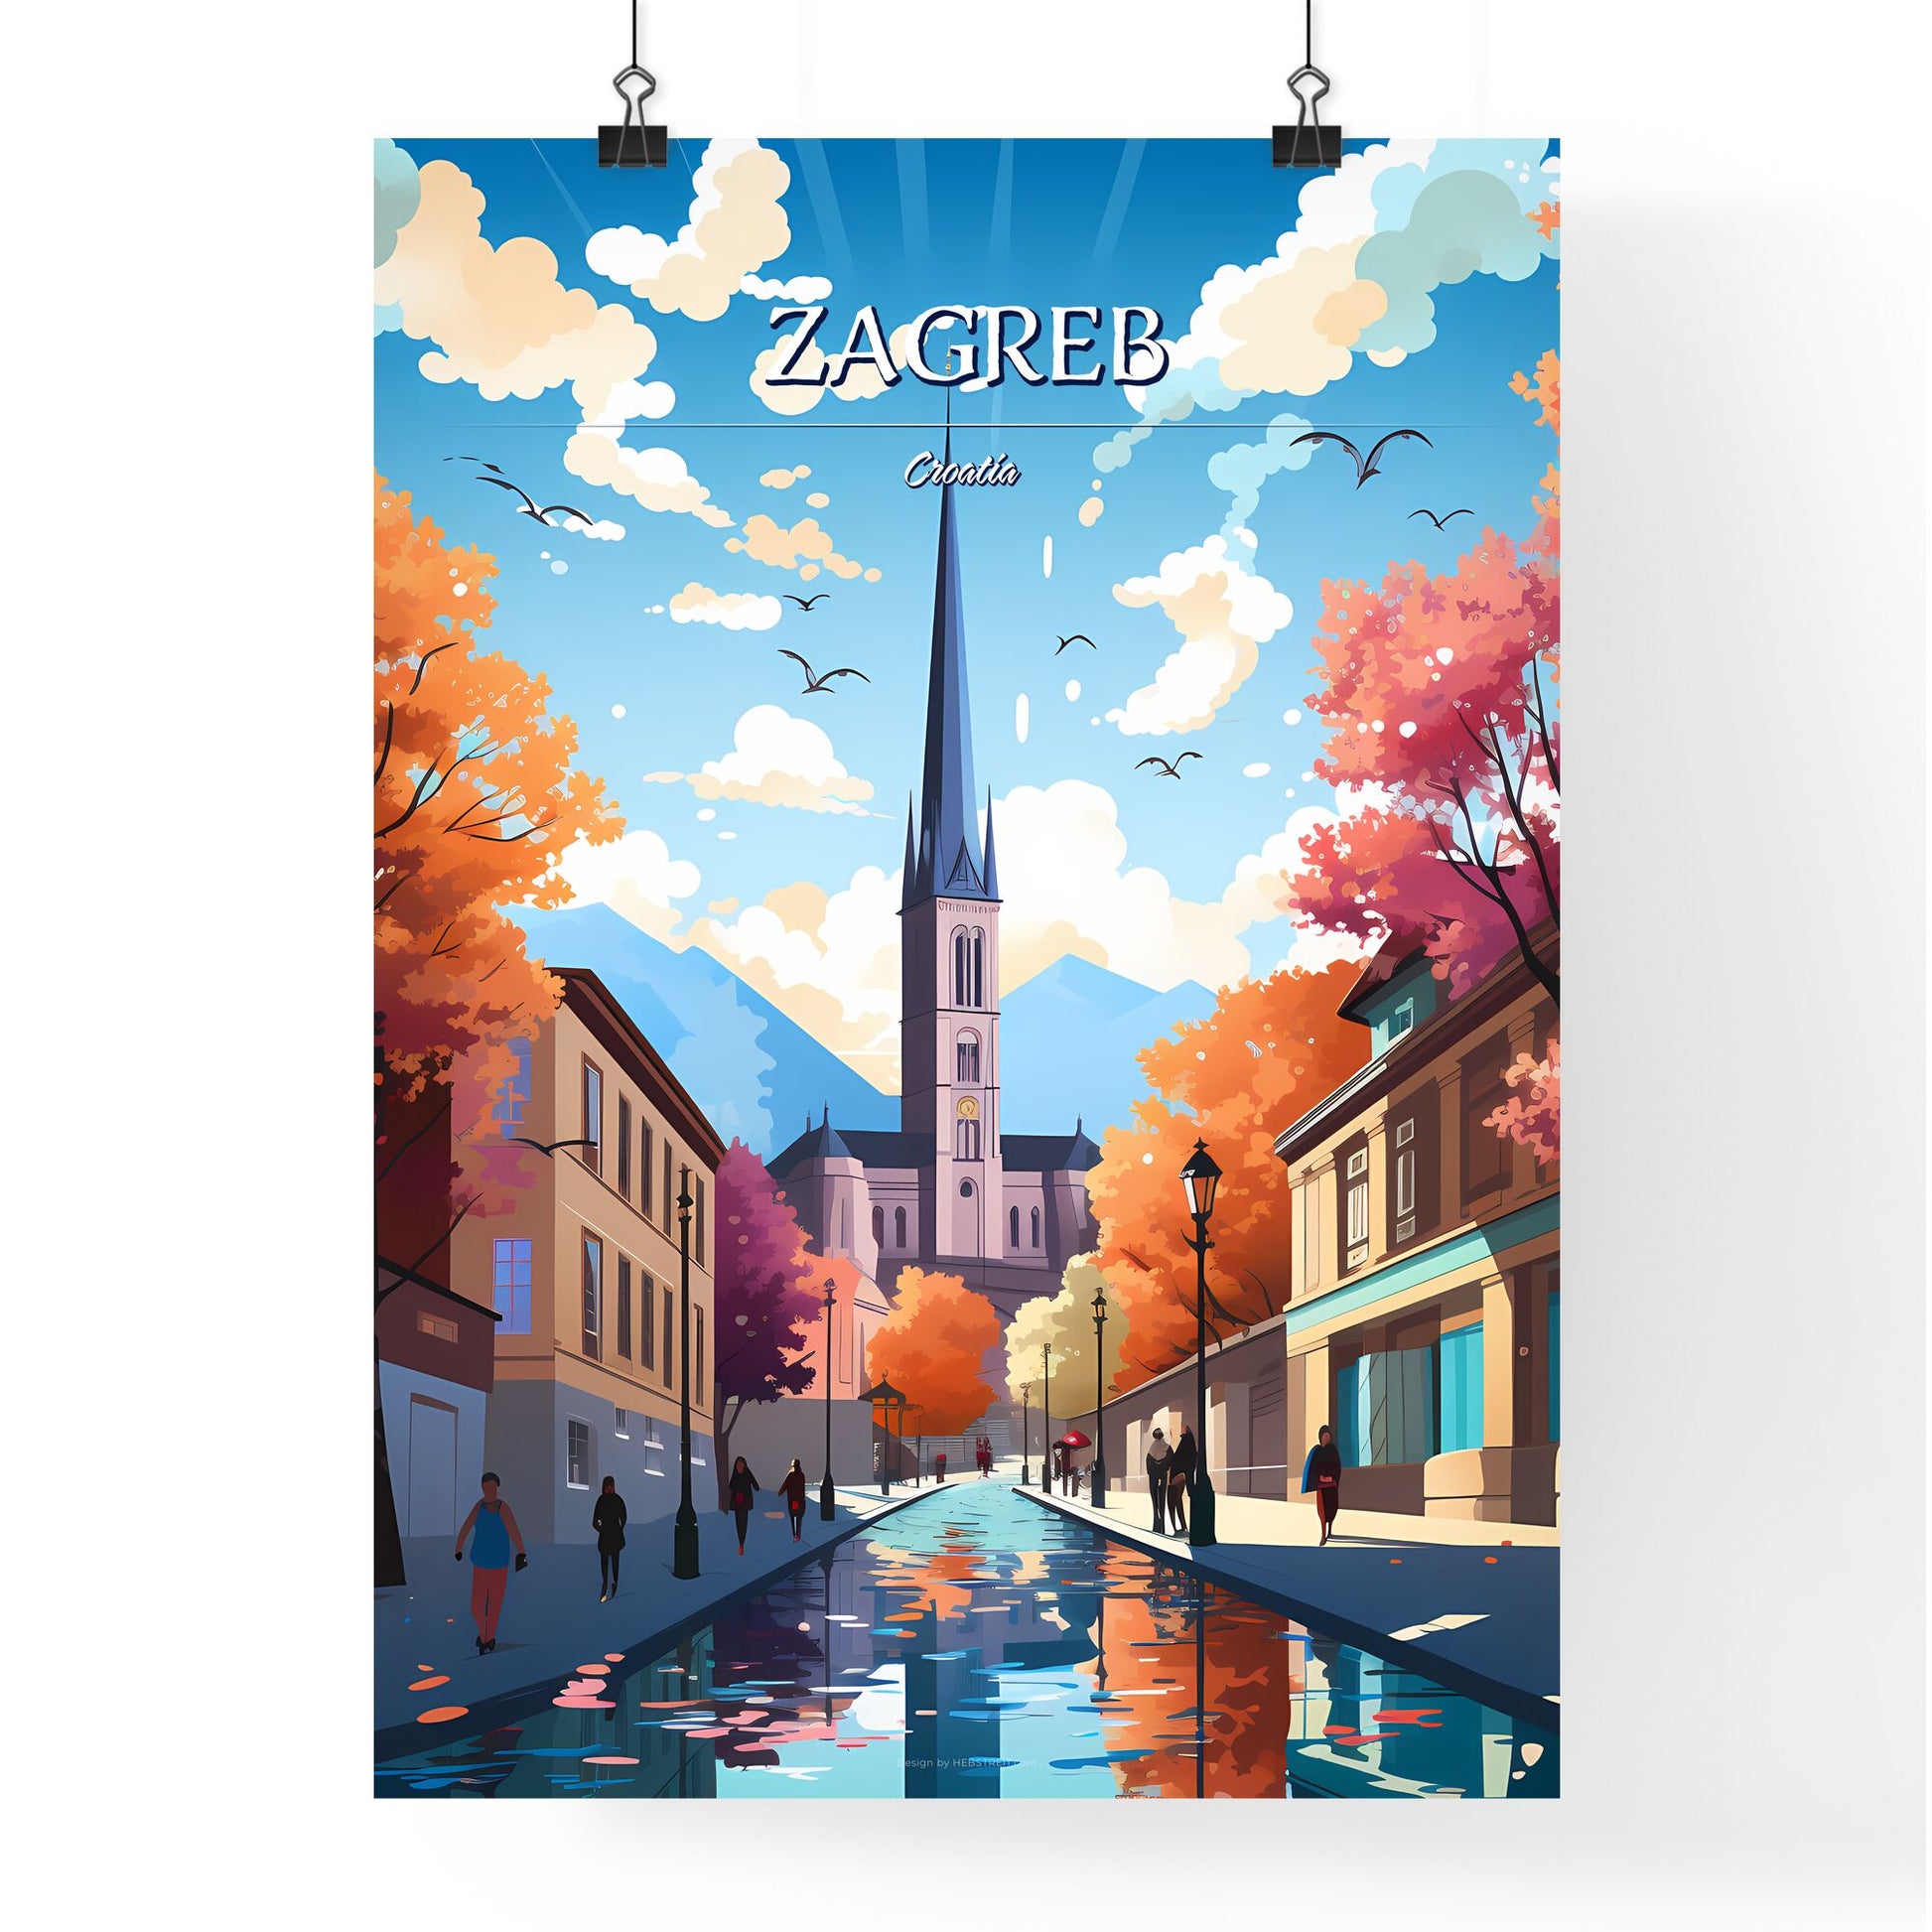 Zagreb, Croatia - Art print of a street with a church and trees Default Title